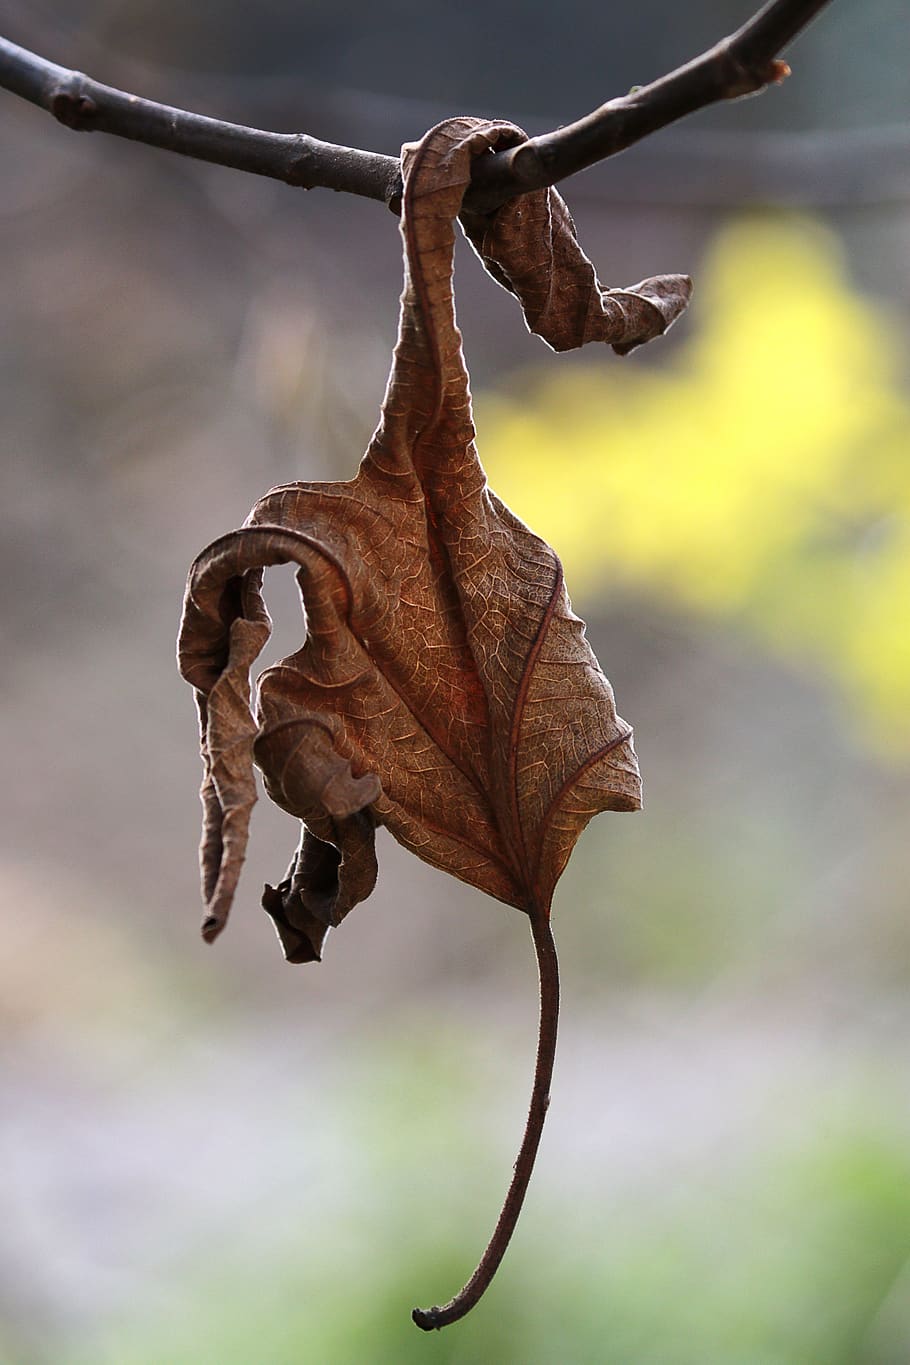 autumn, leaf, nature, season, fall, plant part, focus on foreground, dry, close-up, plant